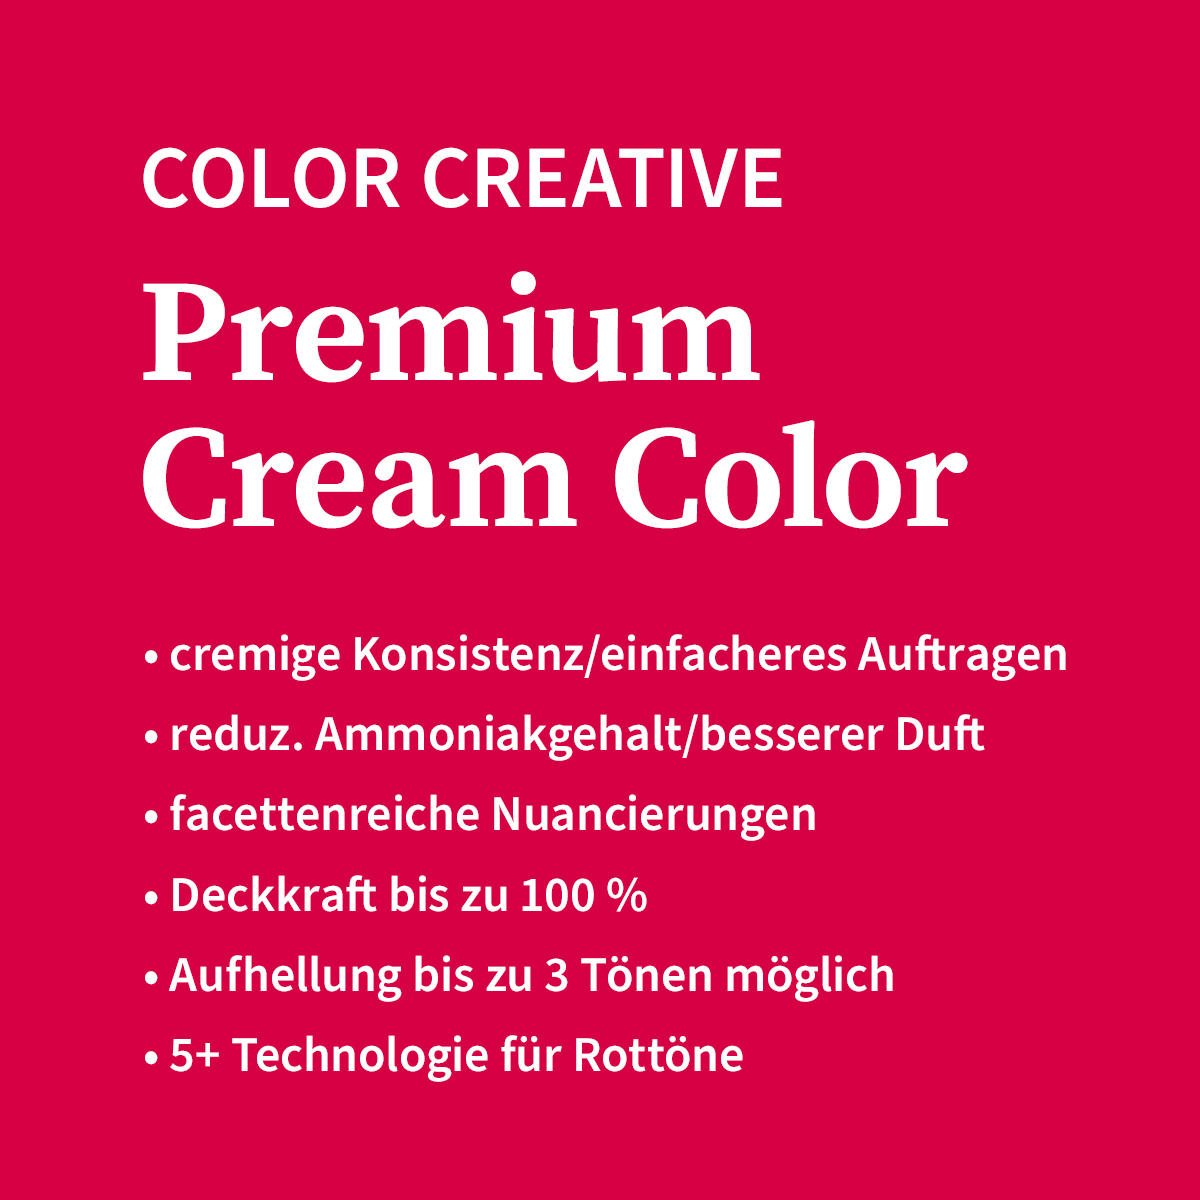 Basler Color Creative Premium Cream Color 10/01 licht blond naturel as - wikingblond speciaal, tube 60 ml - 4